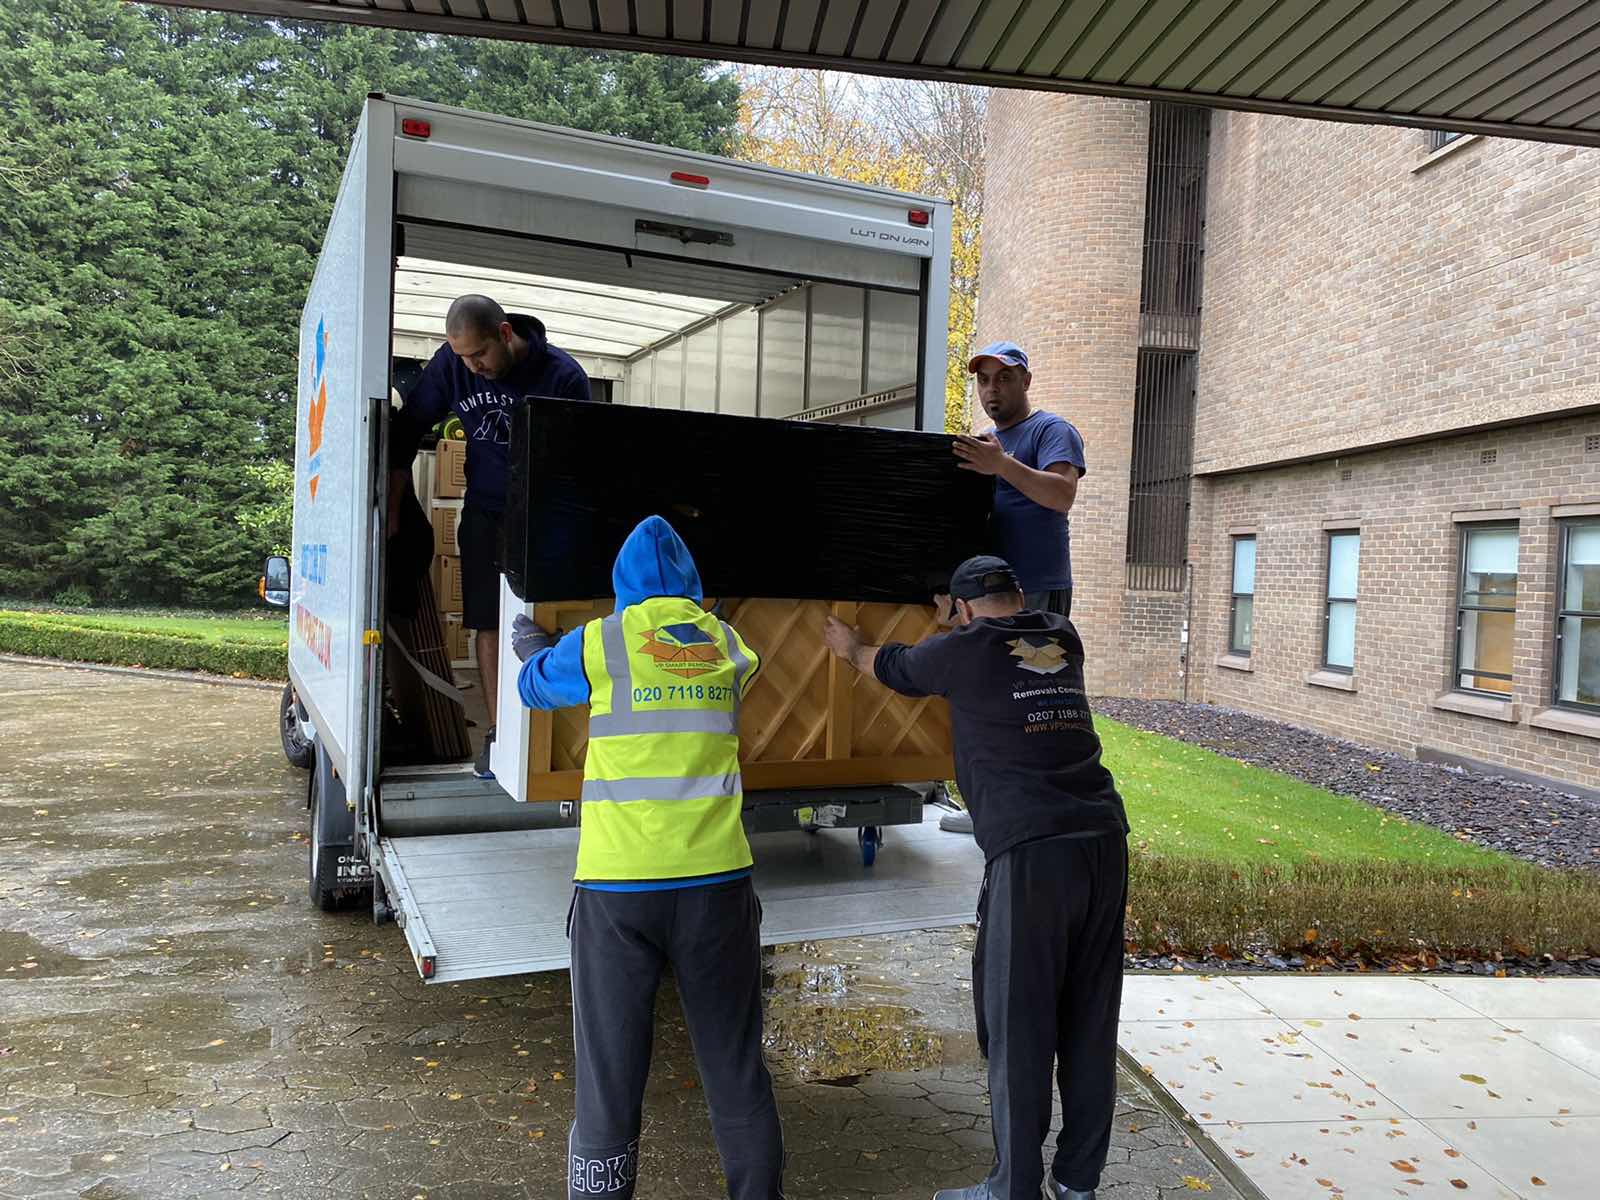 Professional London movers carefully pushing covered piano onto moving truck